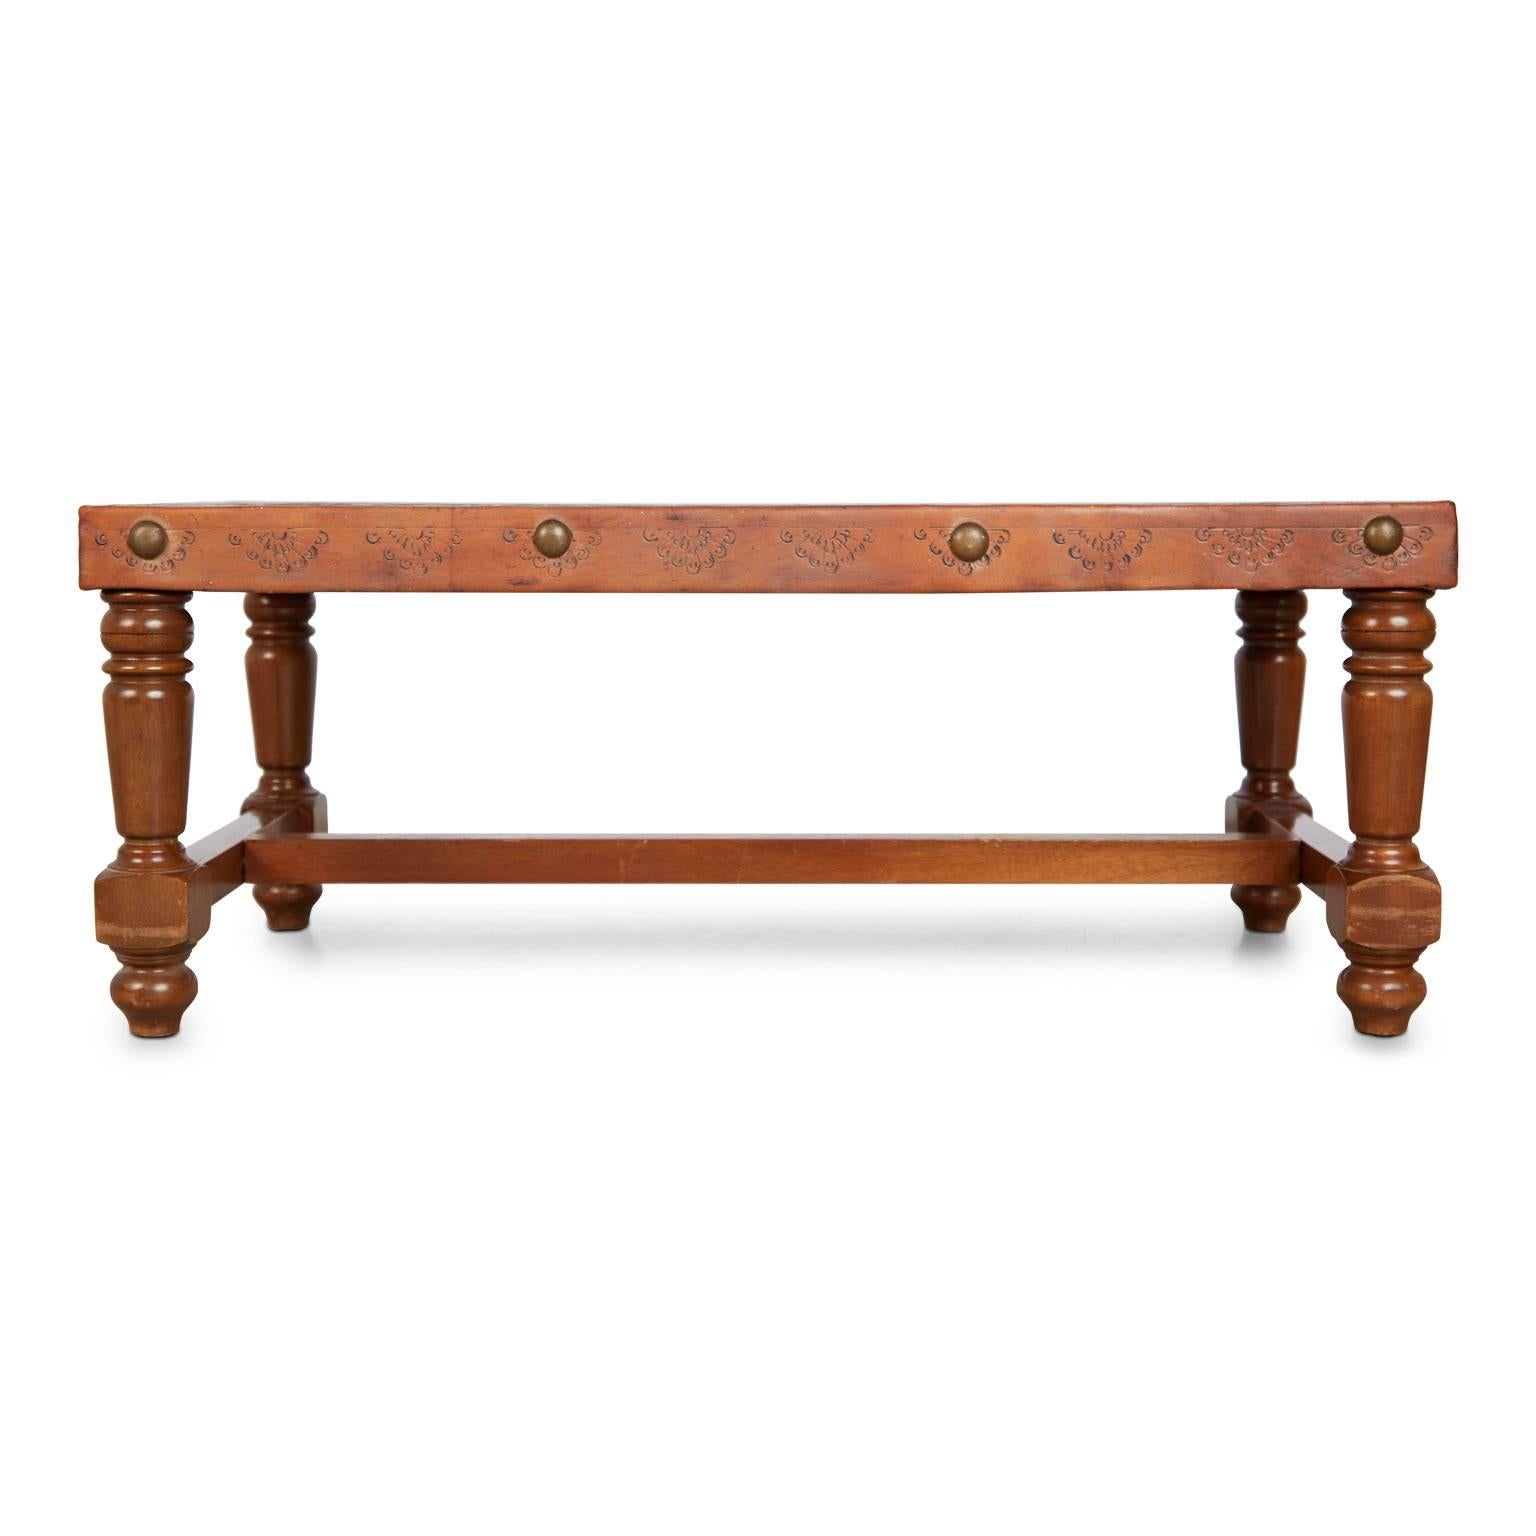 Beautiful hand tooled Peruvian bench or coffee table (you can use for either) depicting a South American pastoral scene. Fabricated from a walnut frame with turned wood legs, the top is wrapped in leather and illustrated with embossed figures on a